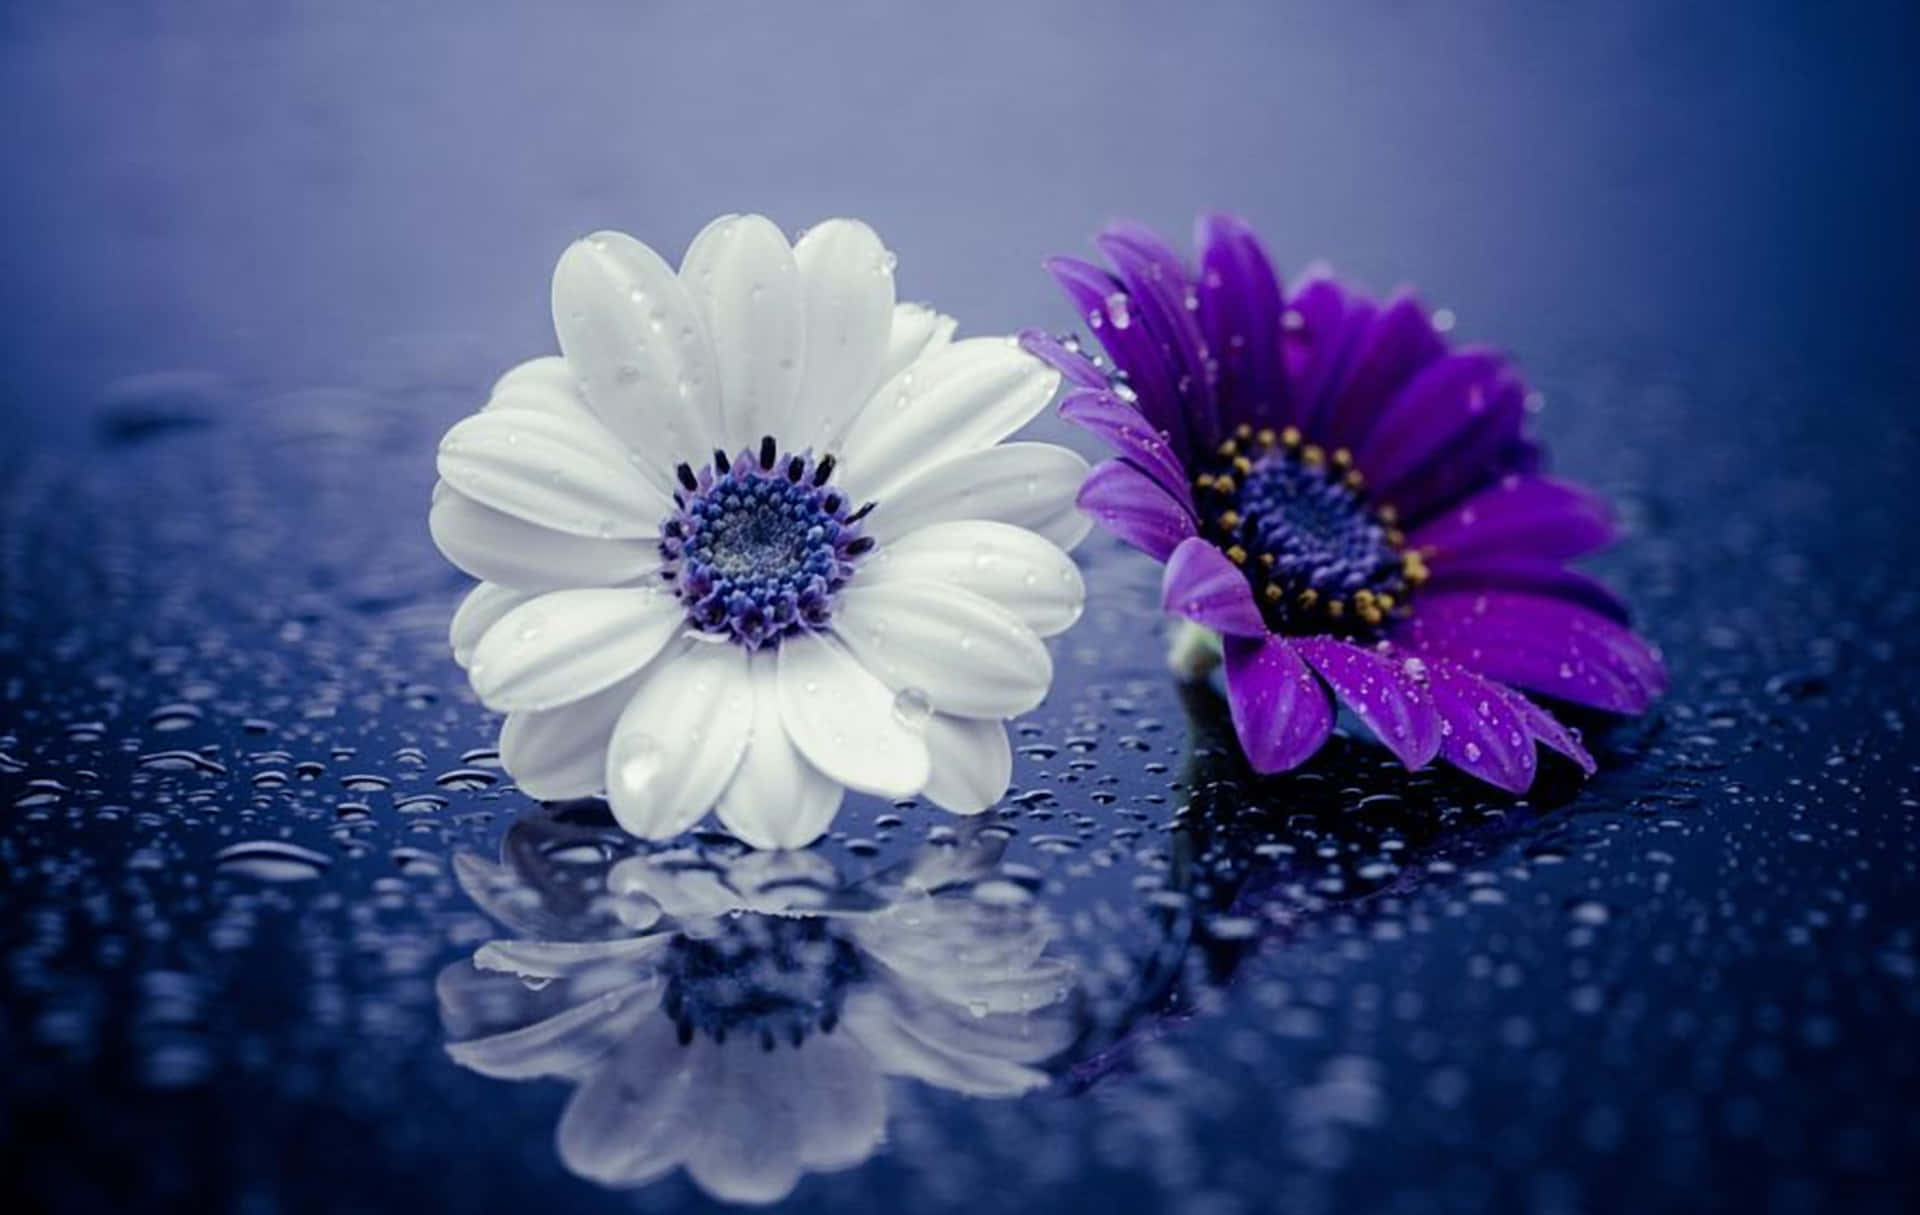 Two Purple Flowers Are Sitting On A Blue Background